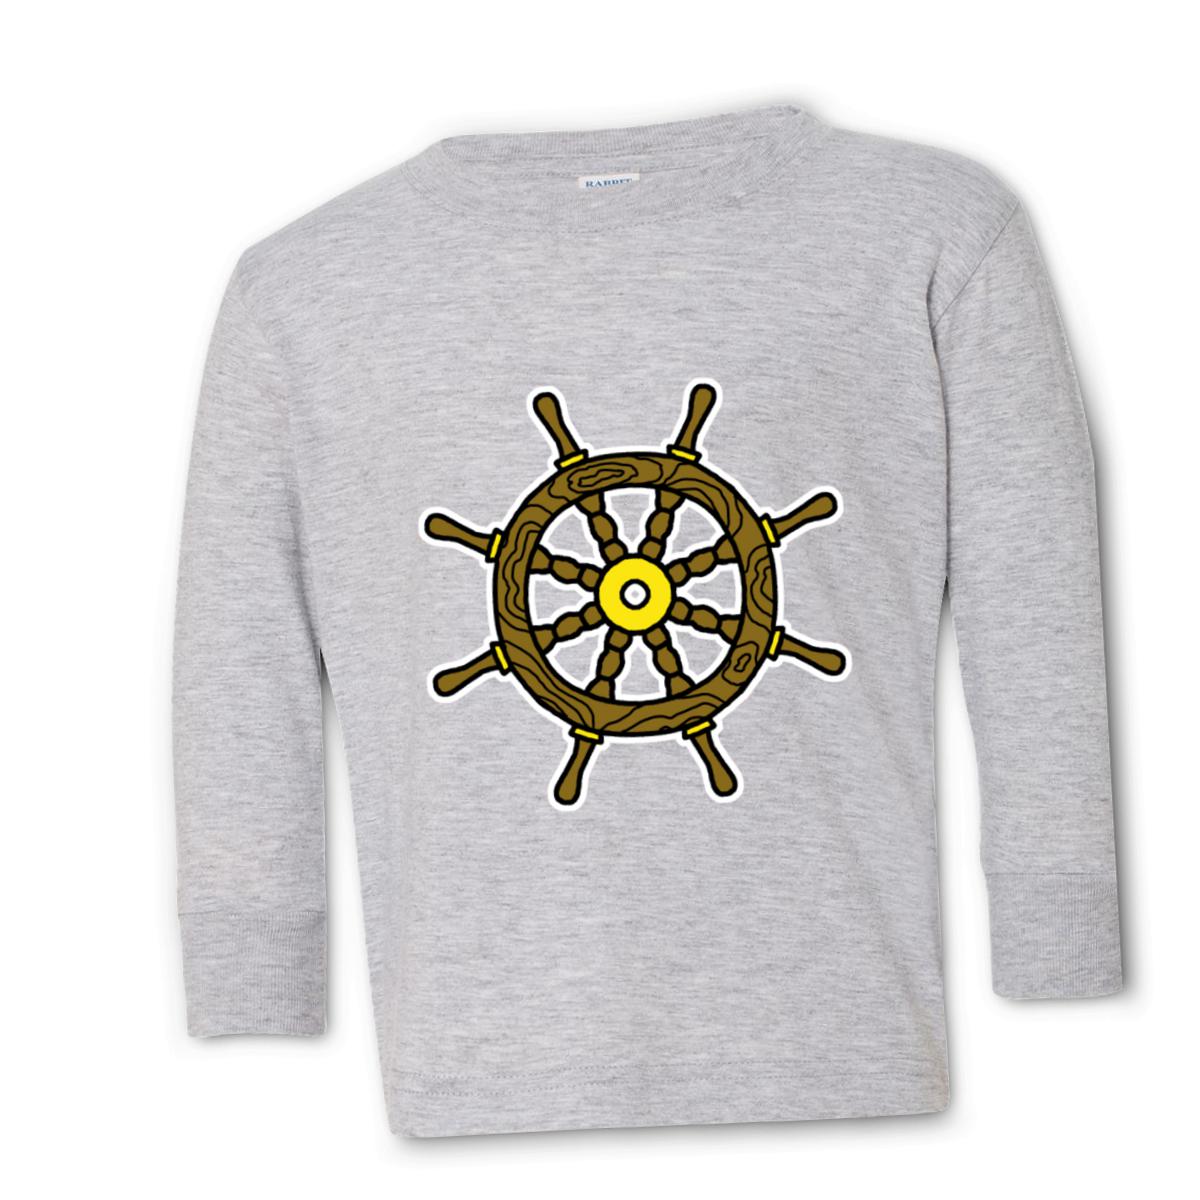 American Traditional Ship Wheel Toddler Long Sleeve Tee 56T heather